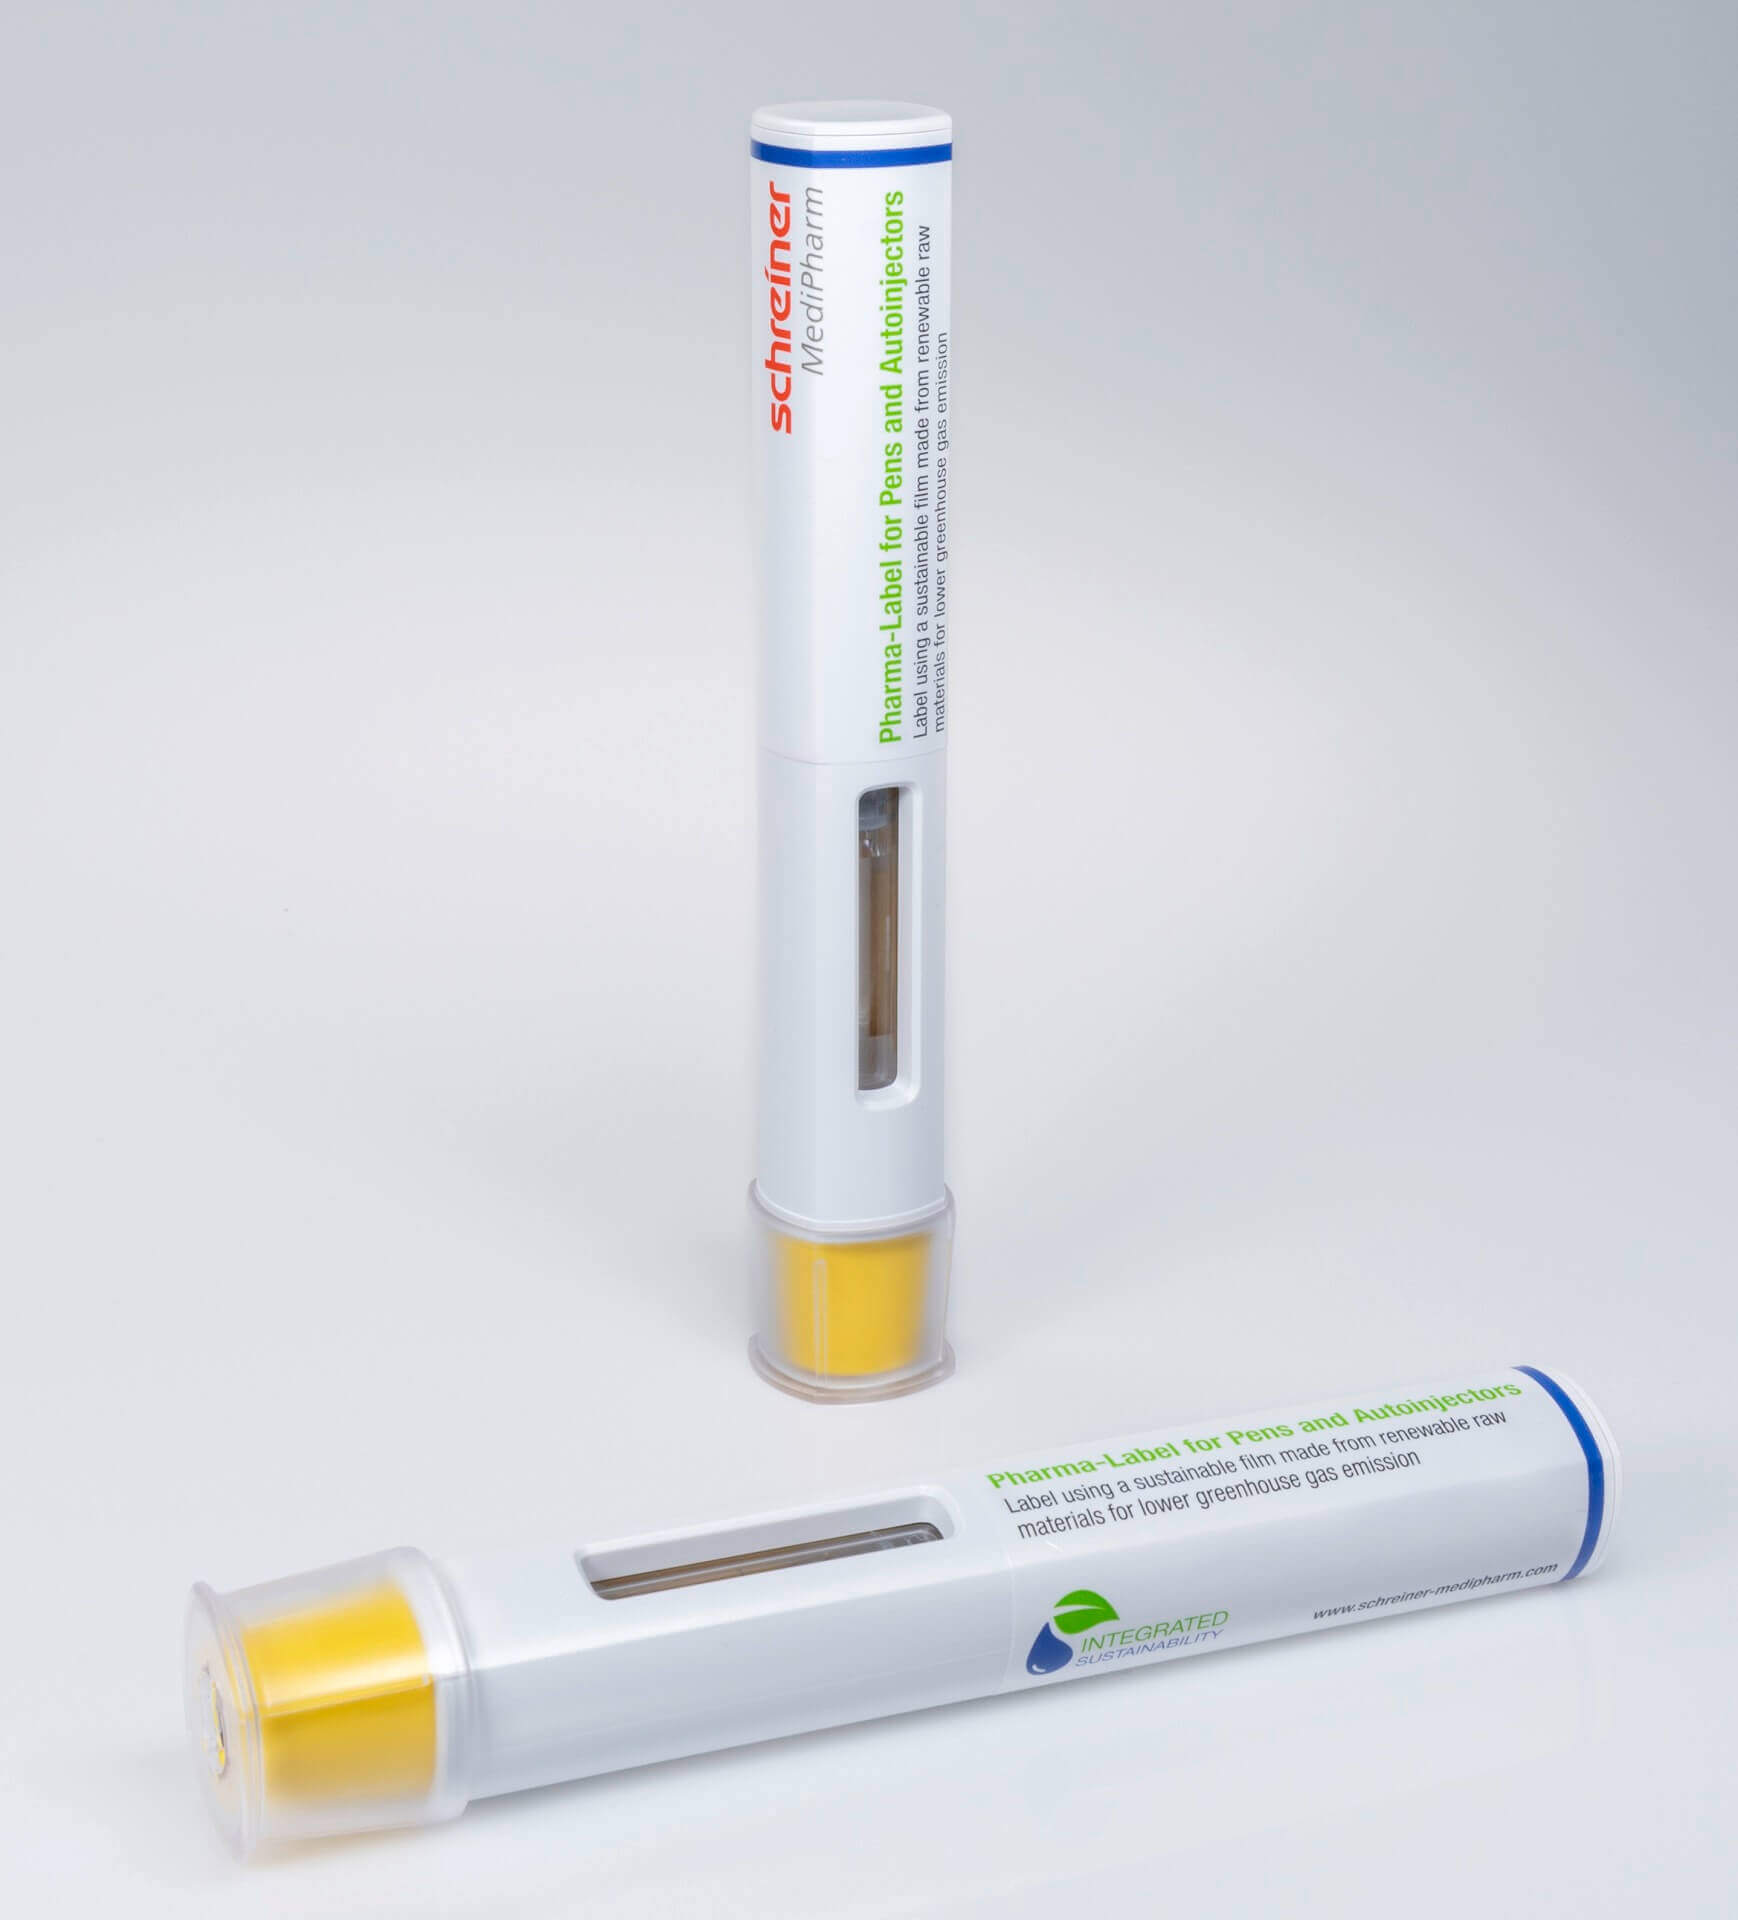 Schreiner MediPharm’s sustainable Autoinjector-Label was produced from eco-friendly material.